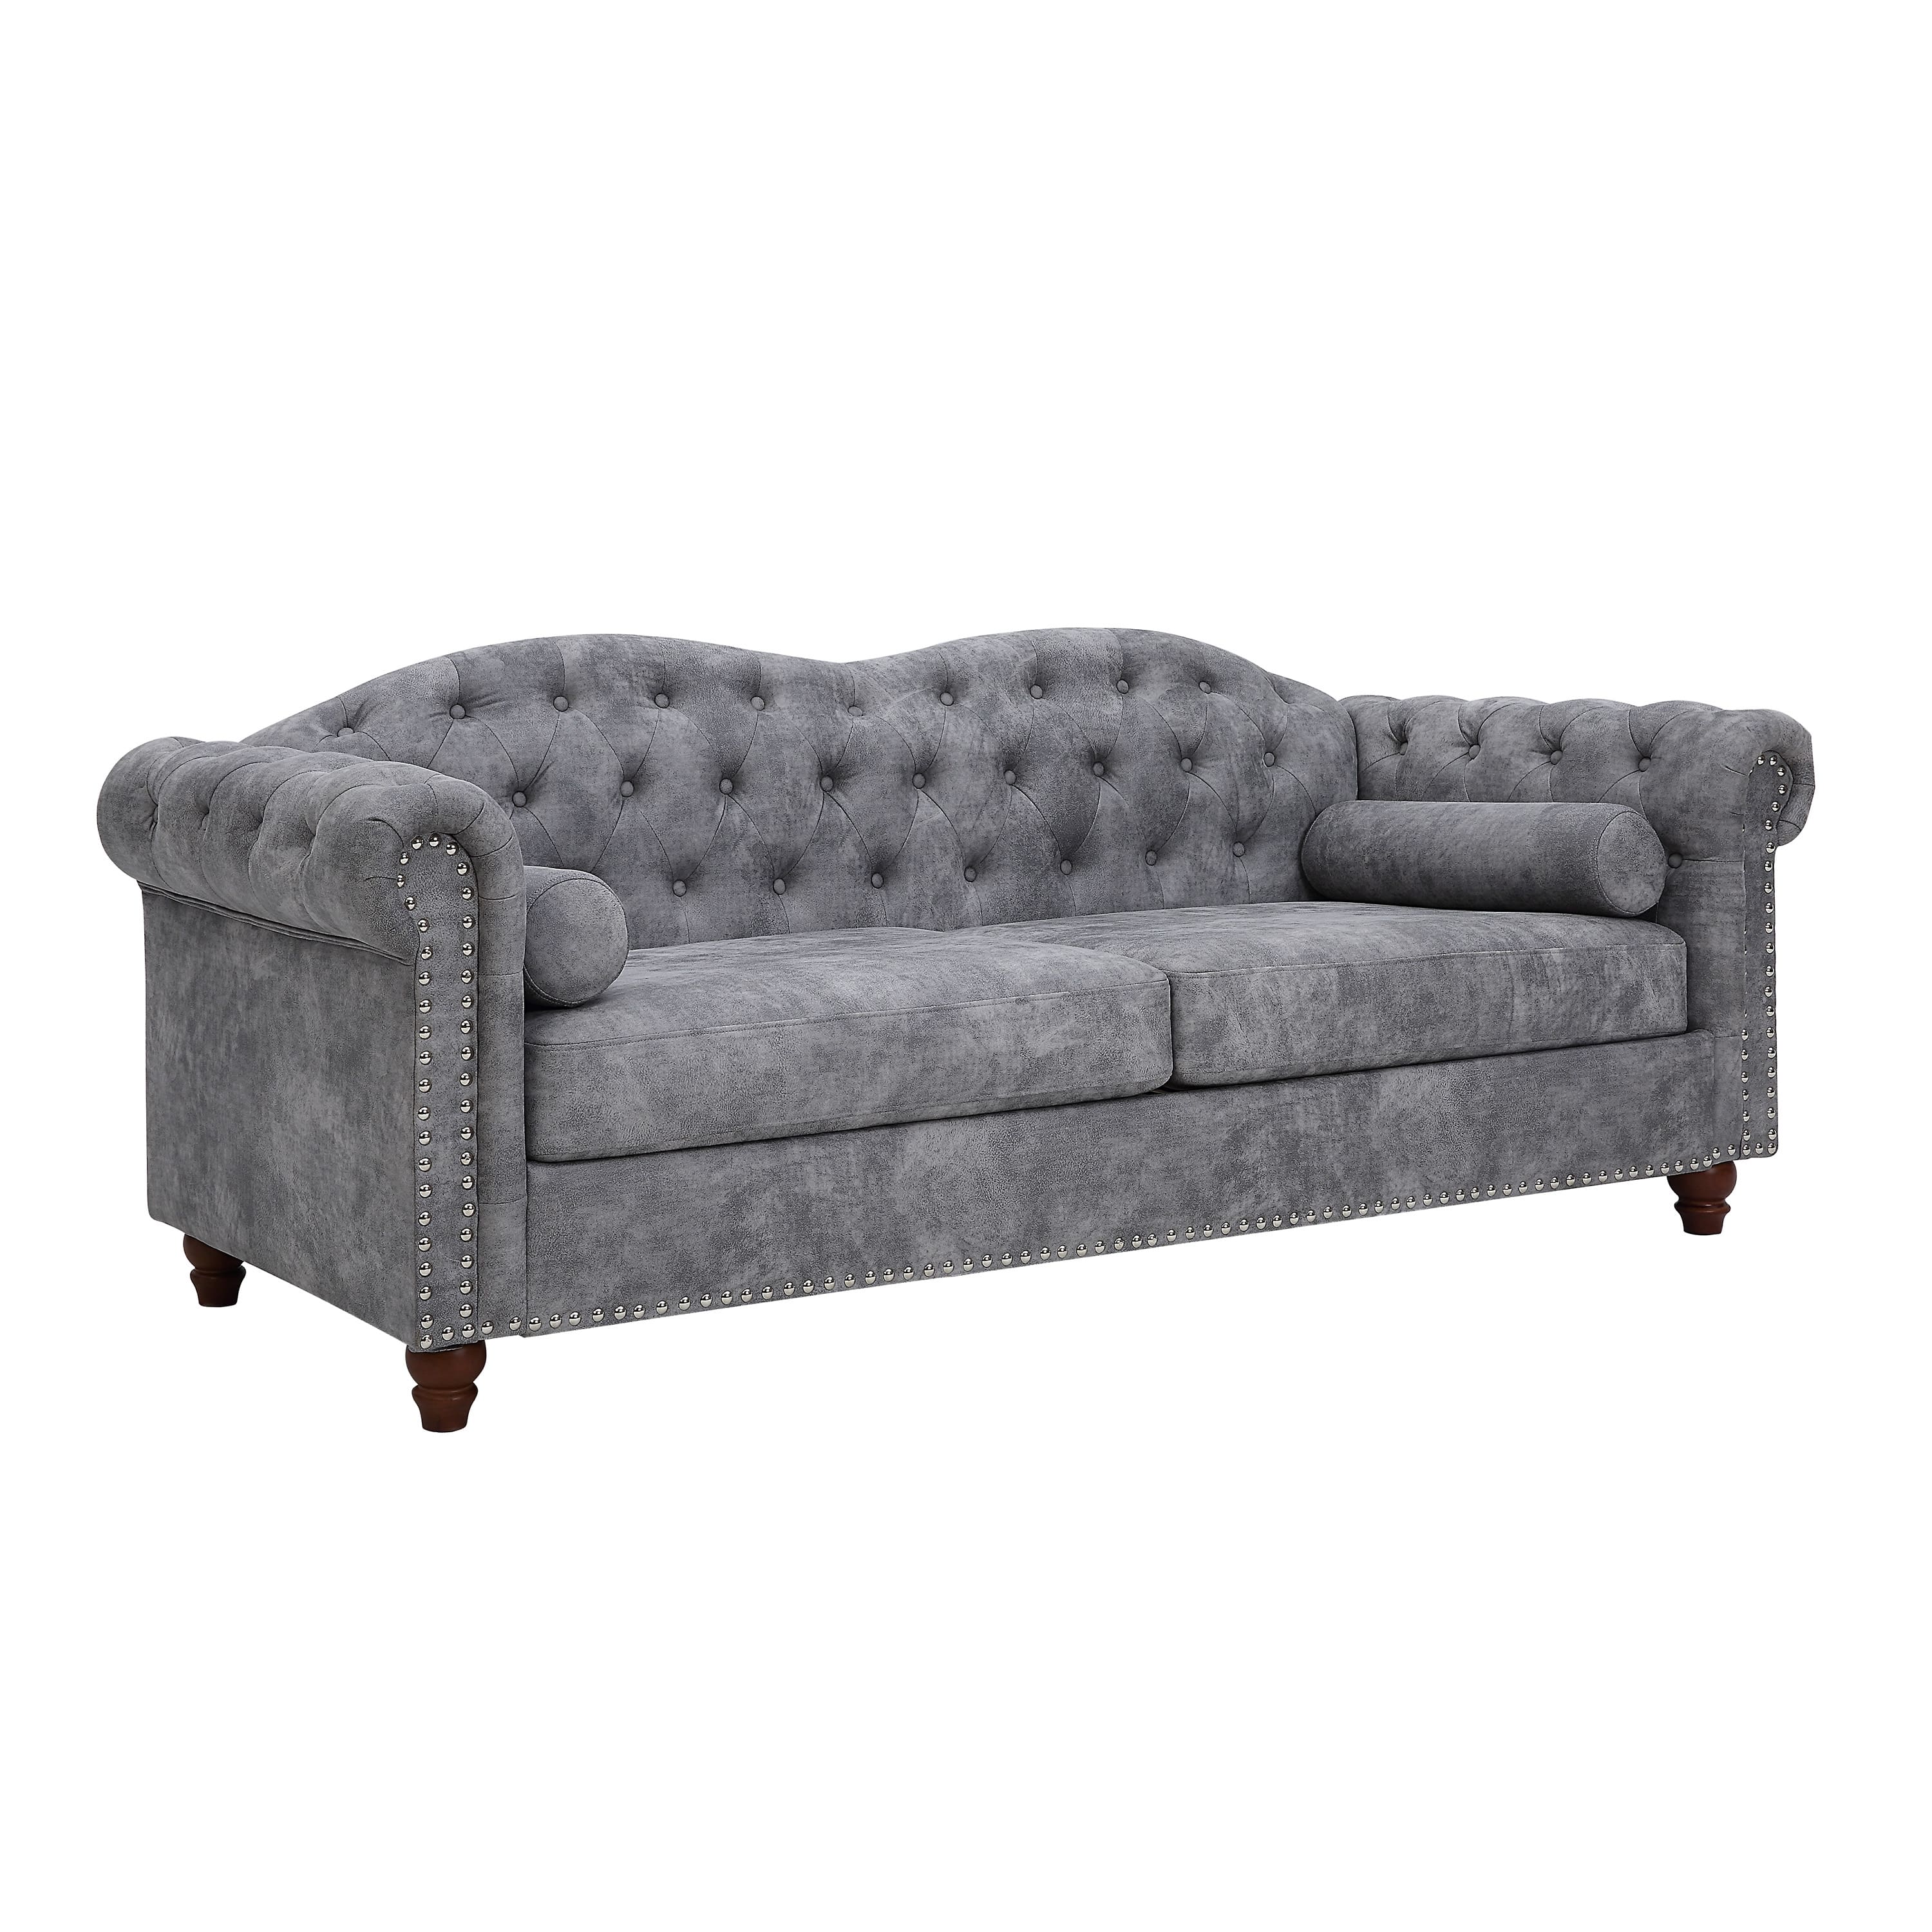 Classic Upholstered Sofa with Solid Wood Leds, Mid-Century Modern Couch ...